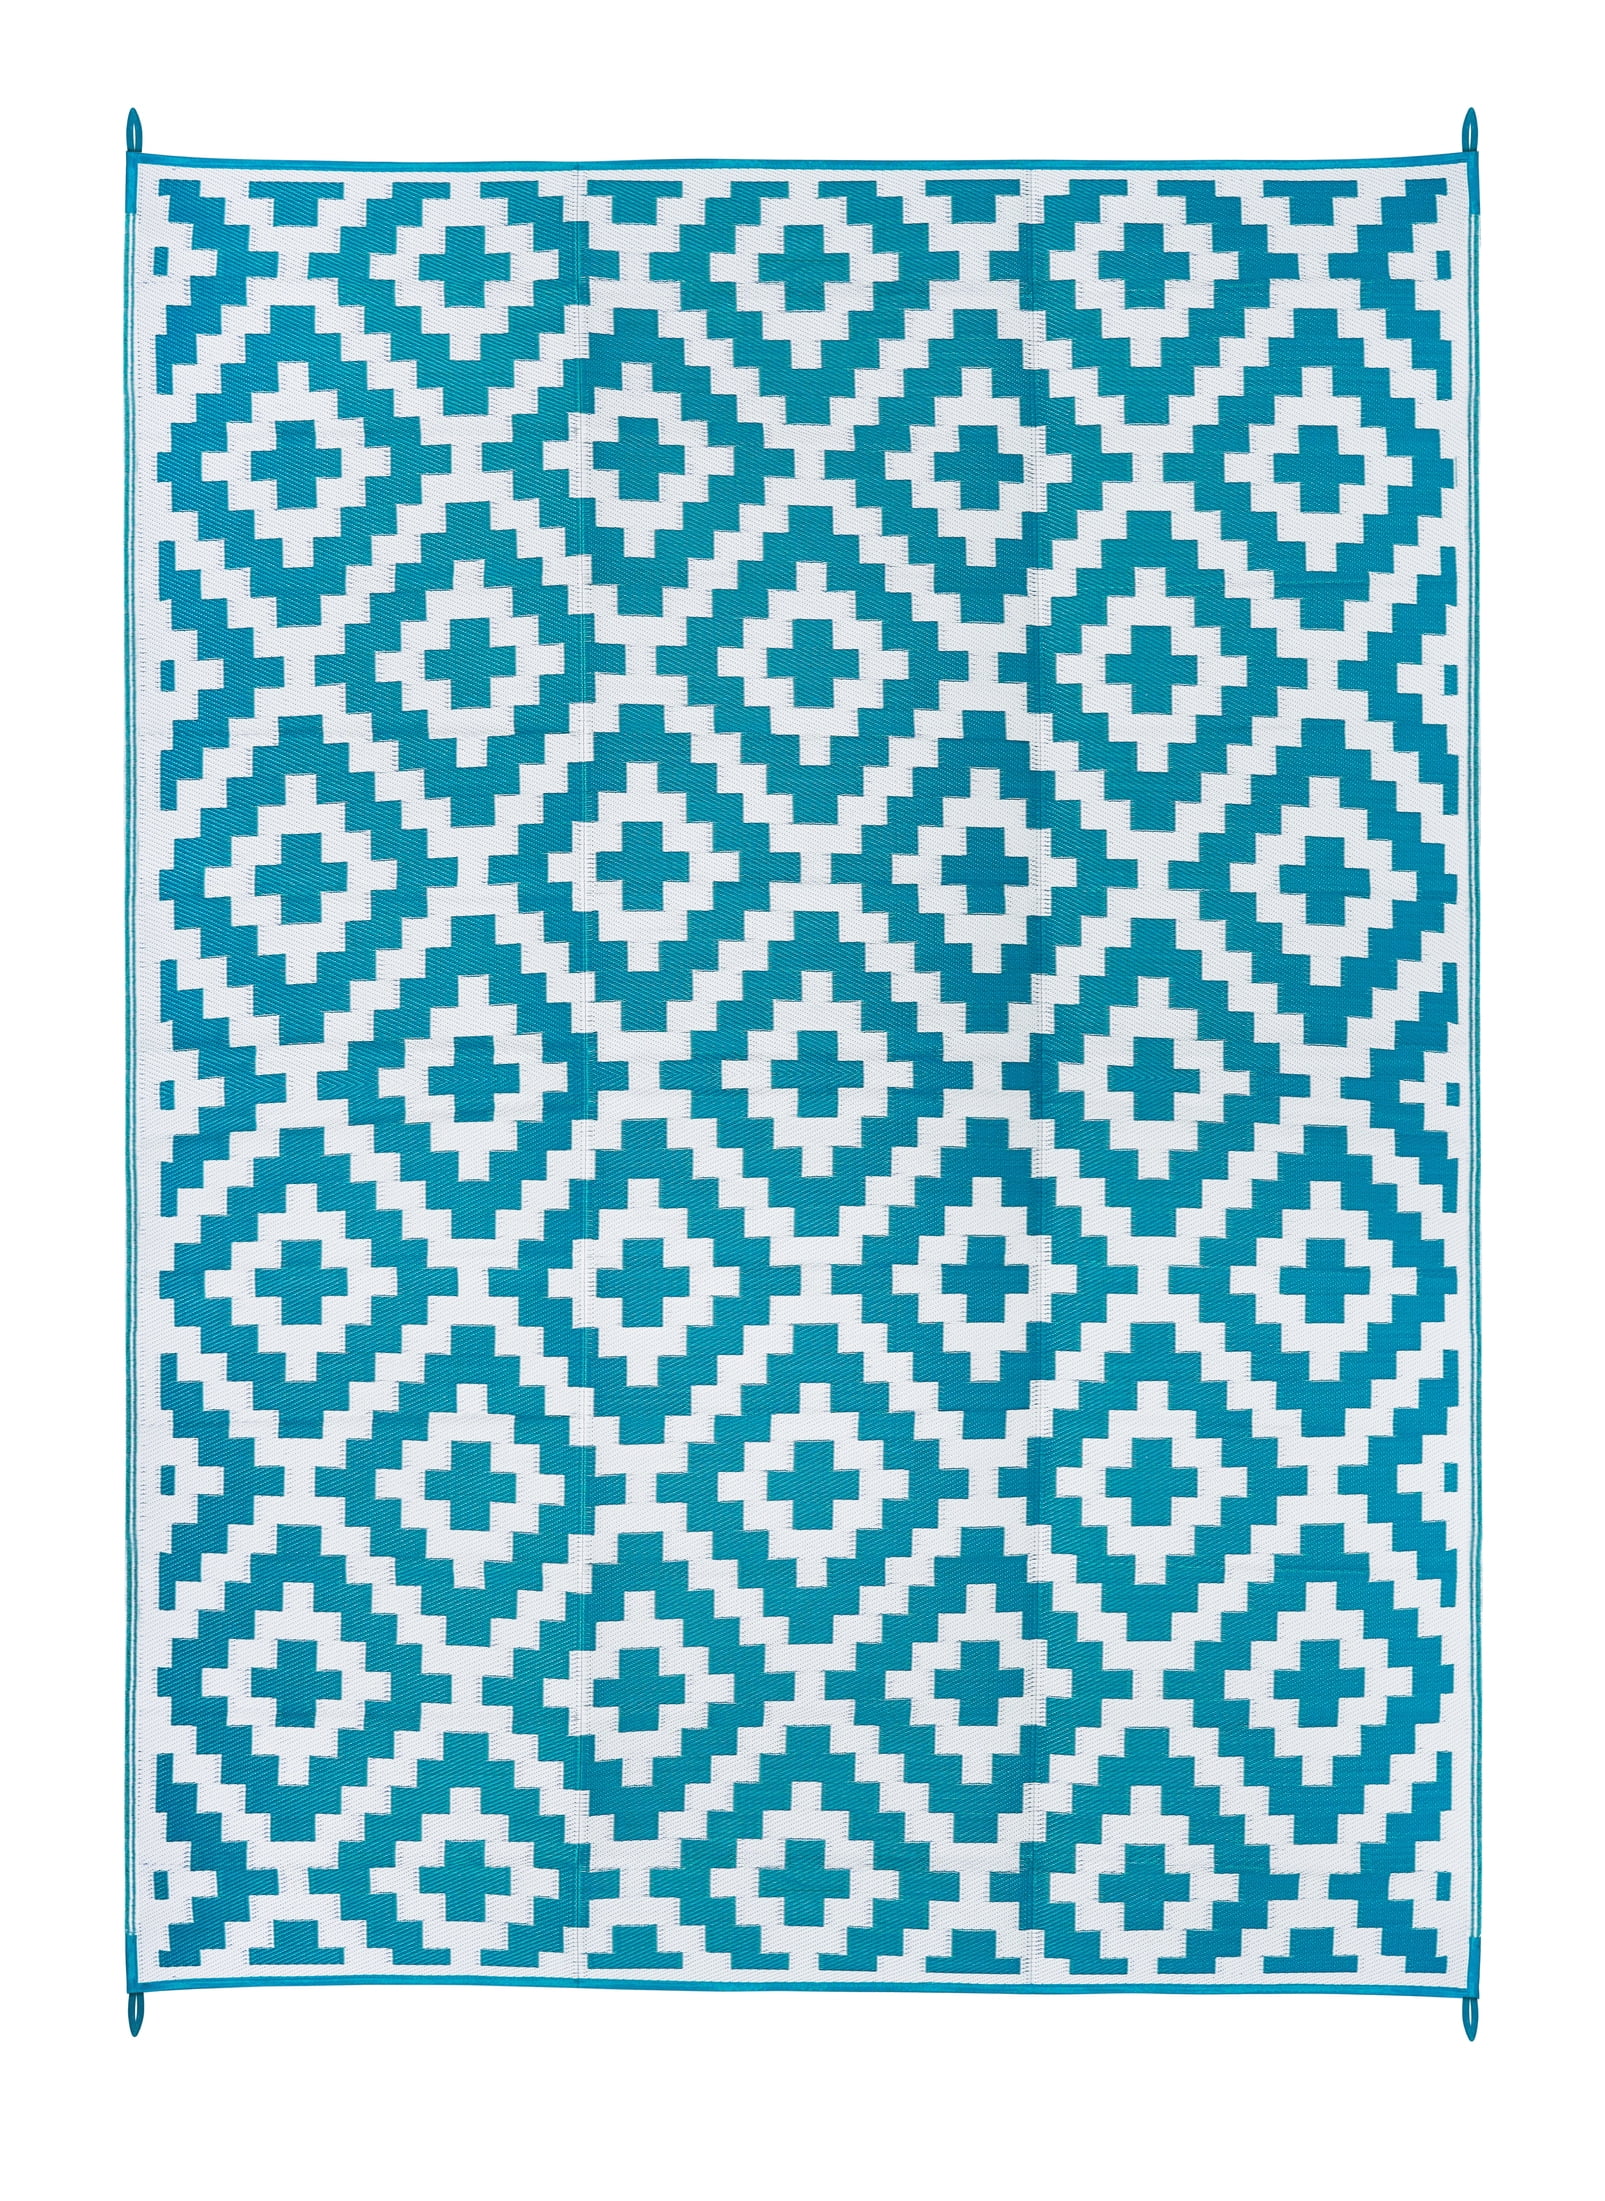 FH Home Outdoor Rug - Waterproof, Fade Resistant, Crease-Free - Premium  Recycled Plastic - Geometric - Patio, Deck, Porch, Balcony, Laundry Room 